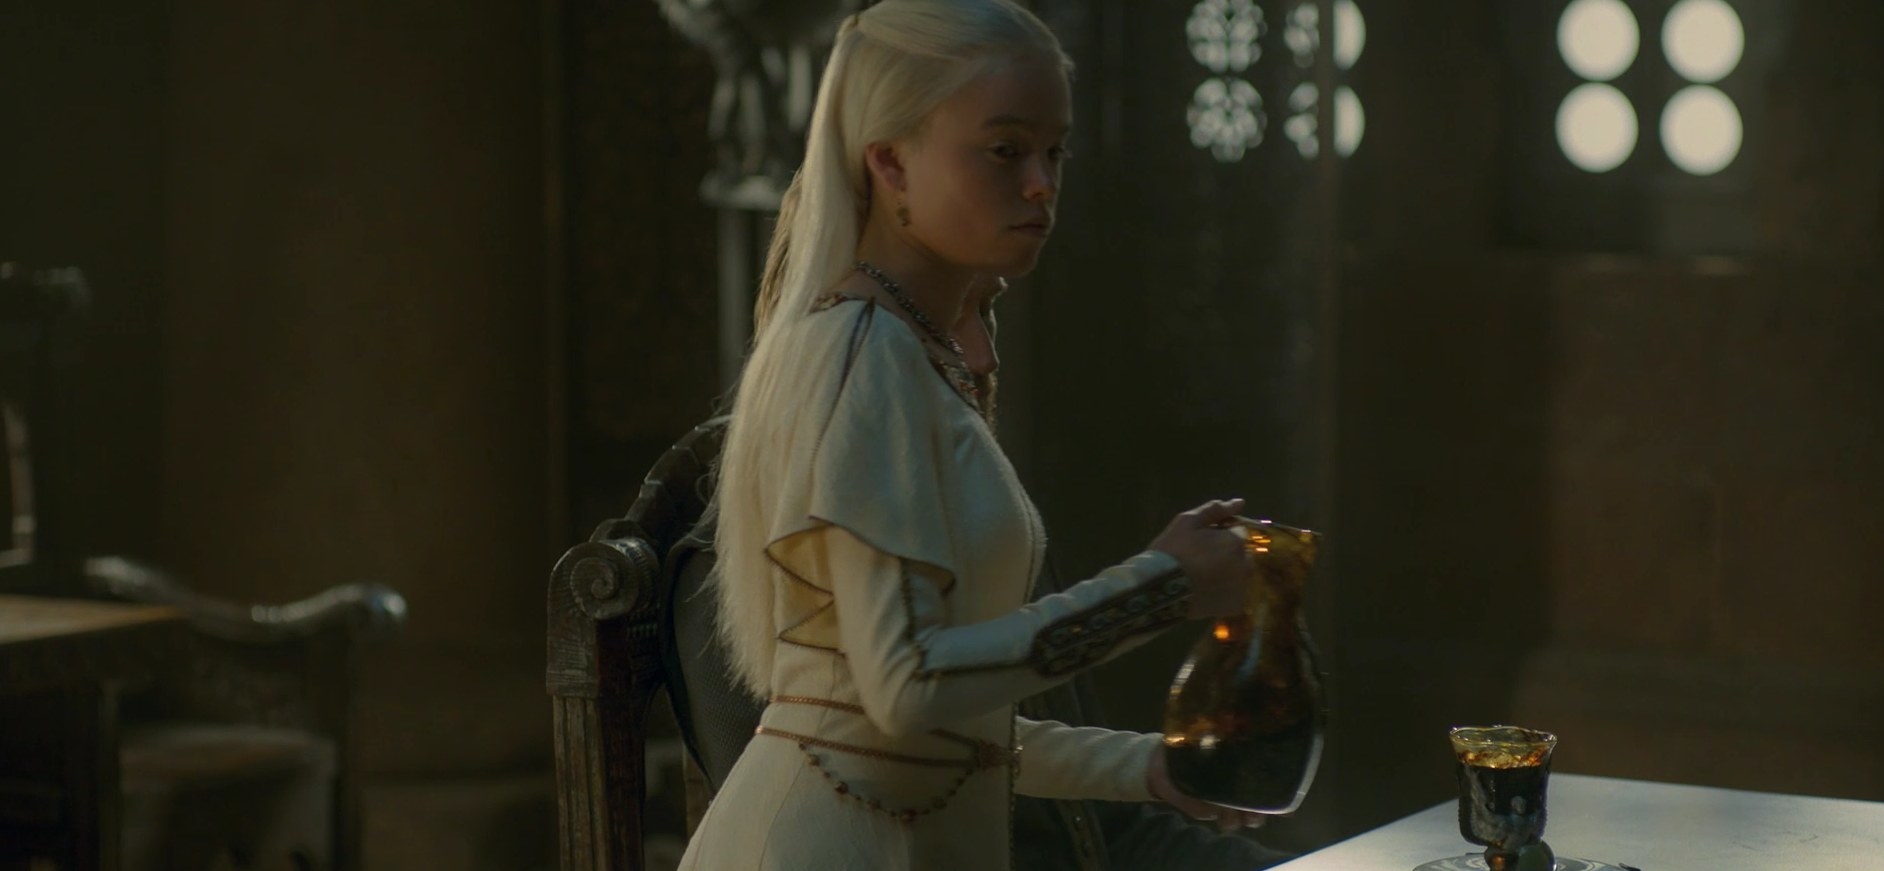 Rhaenyra stands besides a table posed to pour a drink into a cup